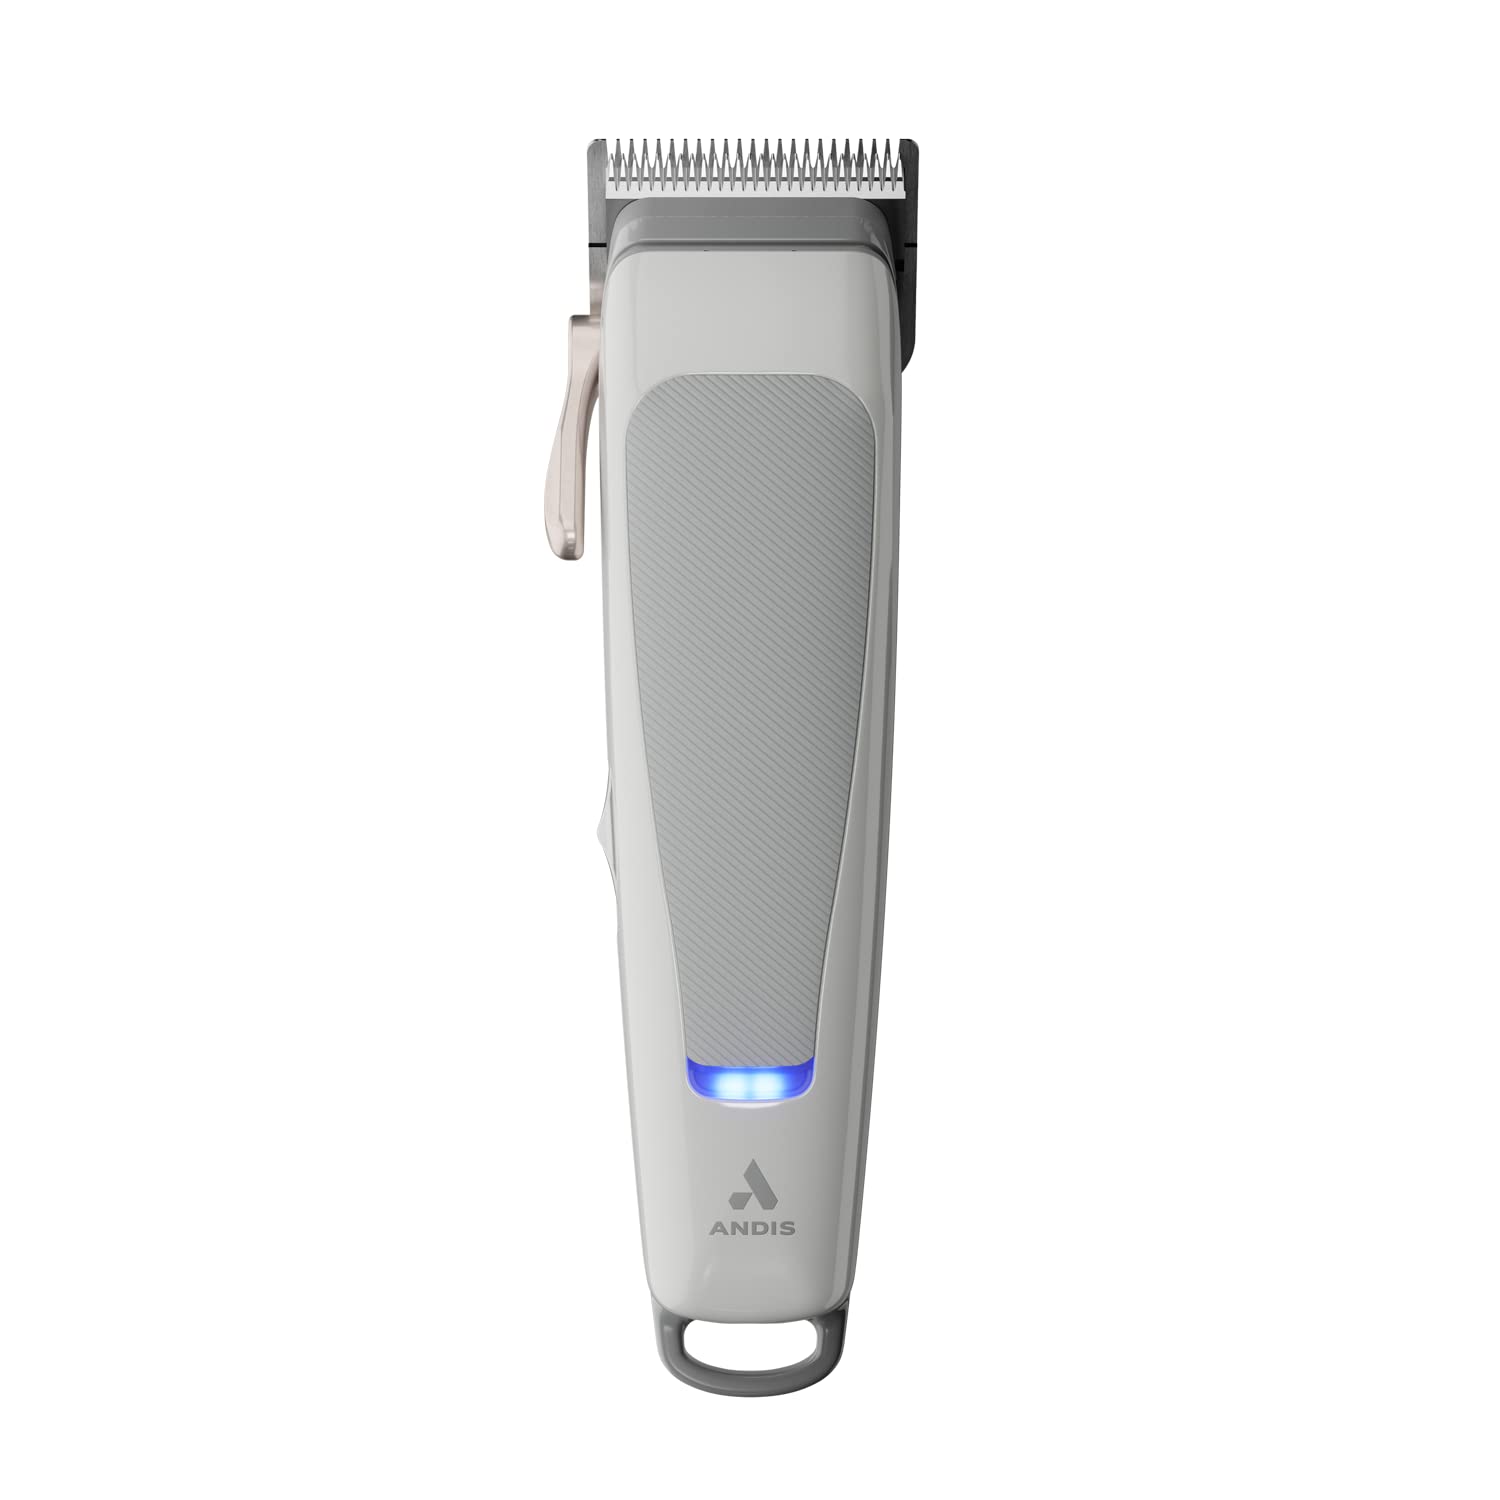 Andis 86100 reVITE Cordless Lithium-Ion Adjustable Taper Hair Cutting Clipper with Stainless Steel Blade - Gray